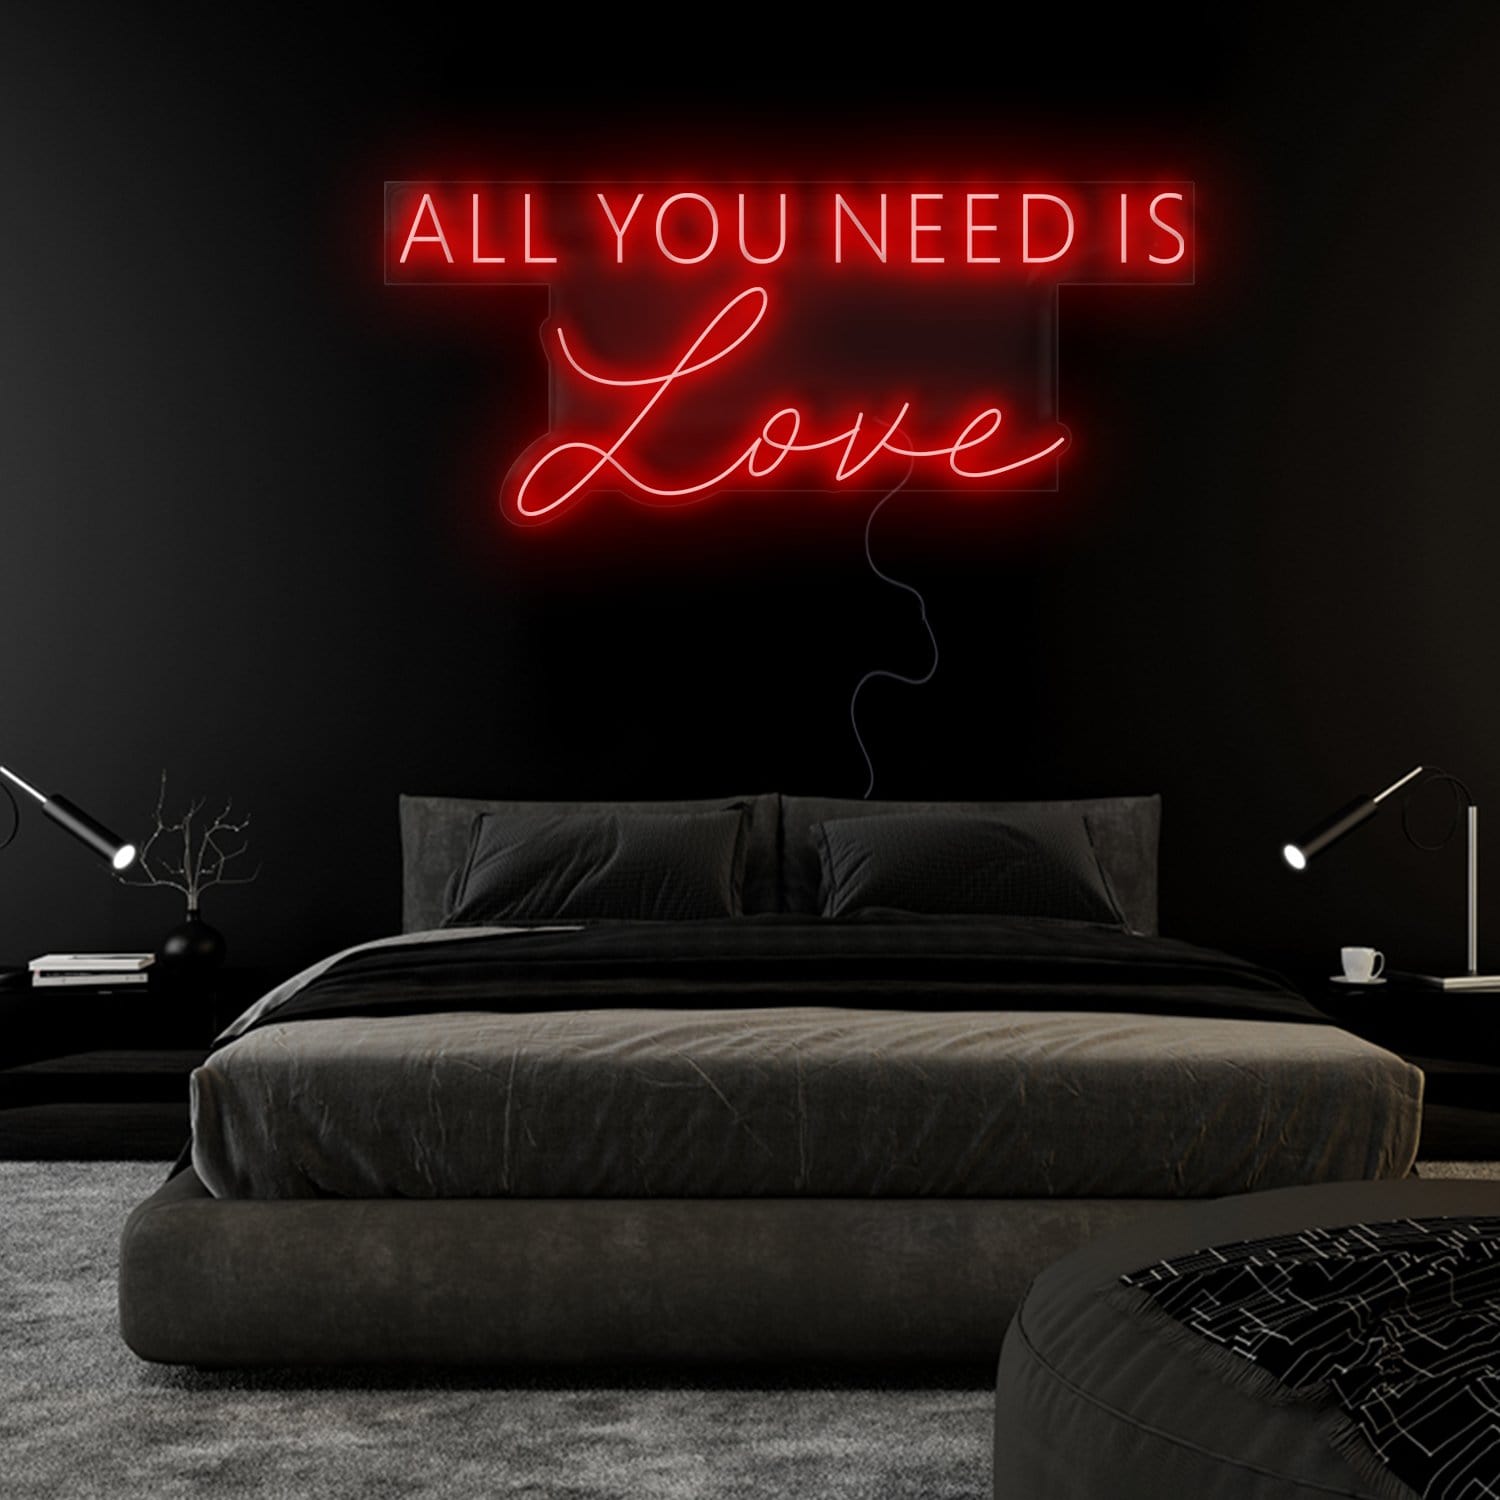 "All You Need is Love" LED Neon Sign Schriftzug - NEONEVERGLOW